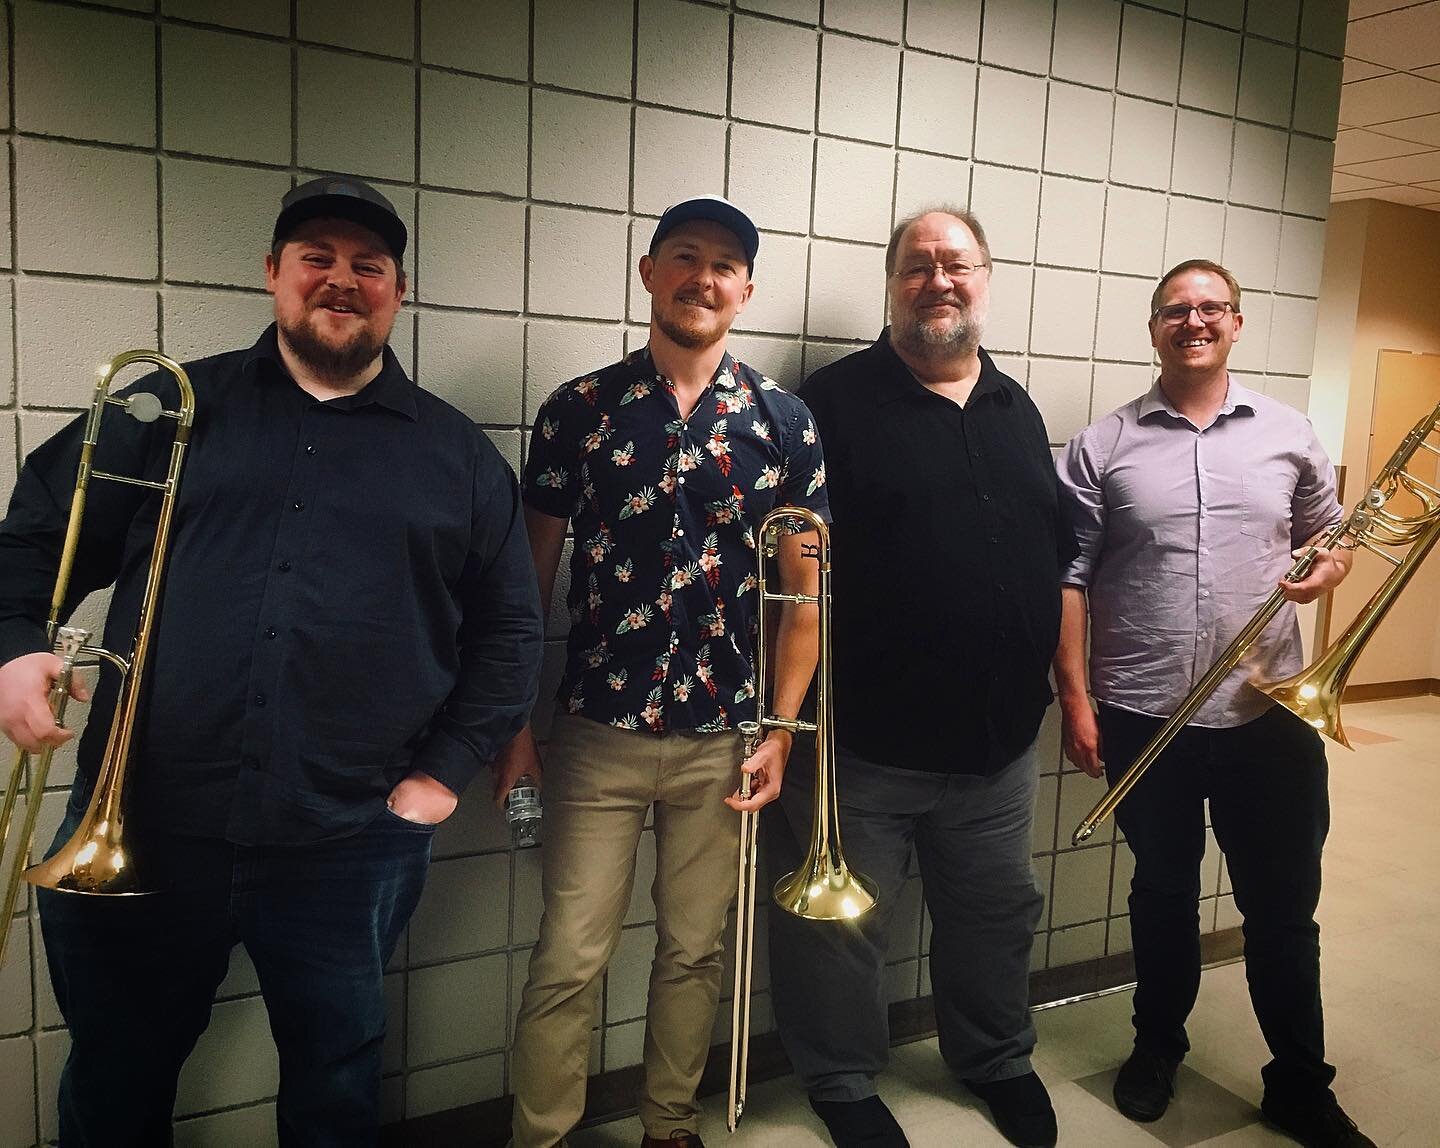 EPIC trombone section with the @drewzaremba big band. (@zachrichmusic #PaulMcKee @tububububub ) It was such an amazing experience having @johnclaytonjazz here all weekend to take the music to the next level. #bigbandisback ❤️